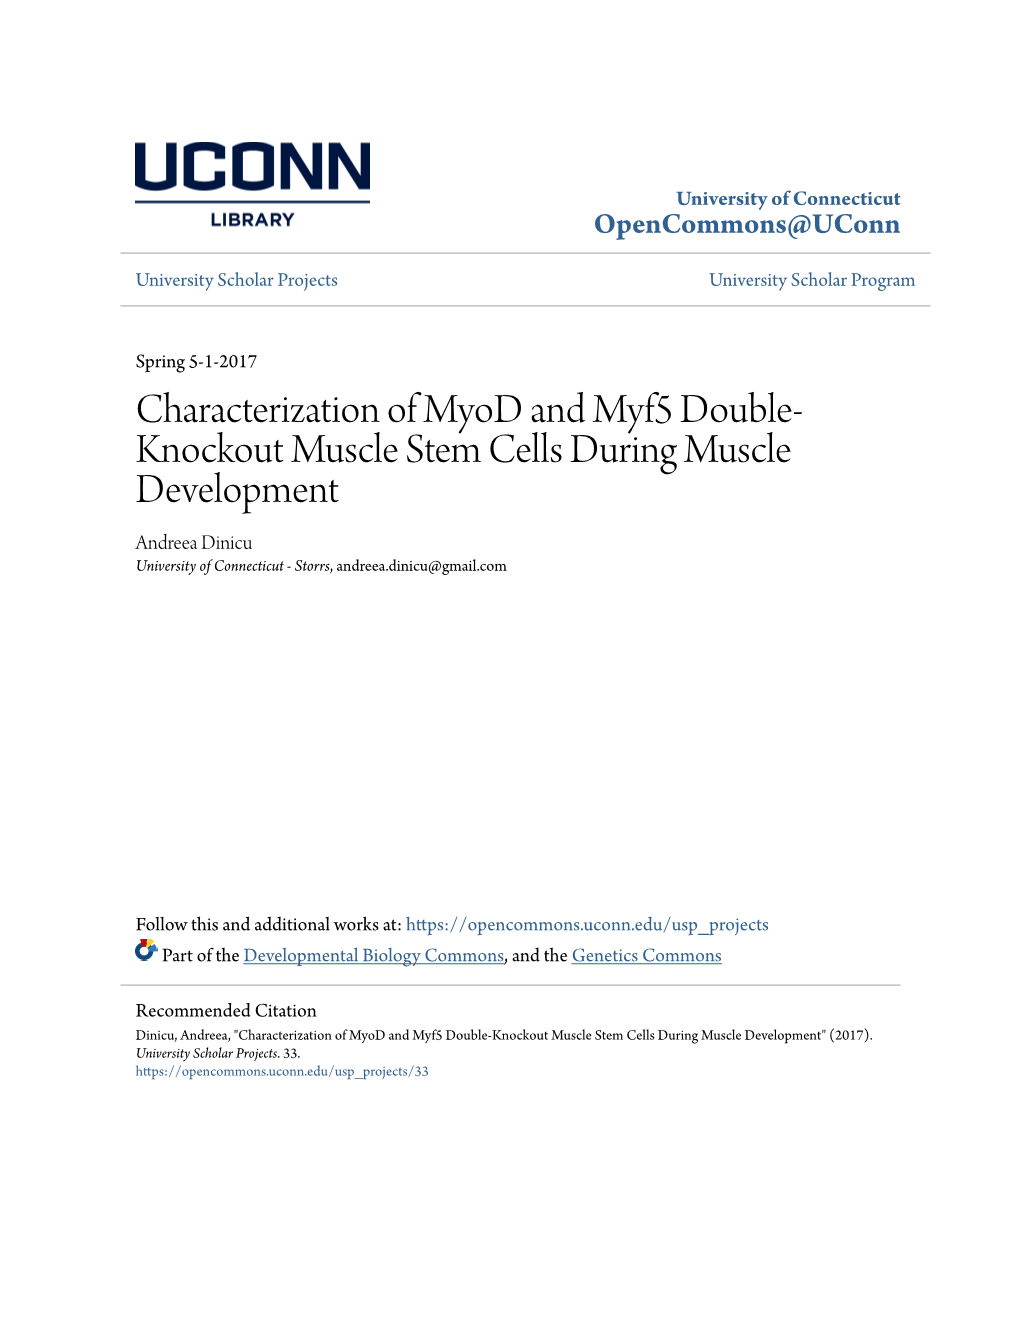 Characterization of Myod and Myf5 Double-Knockout Muscle Stem Cells During Muscle Development" (2017)